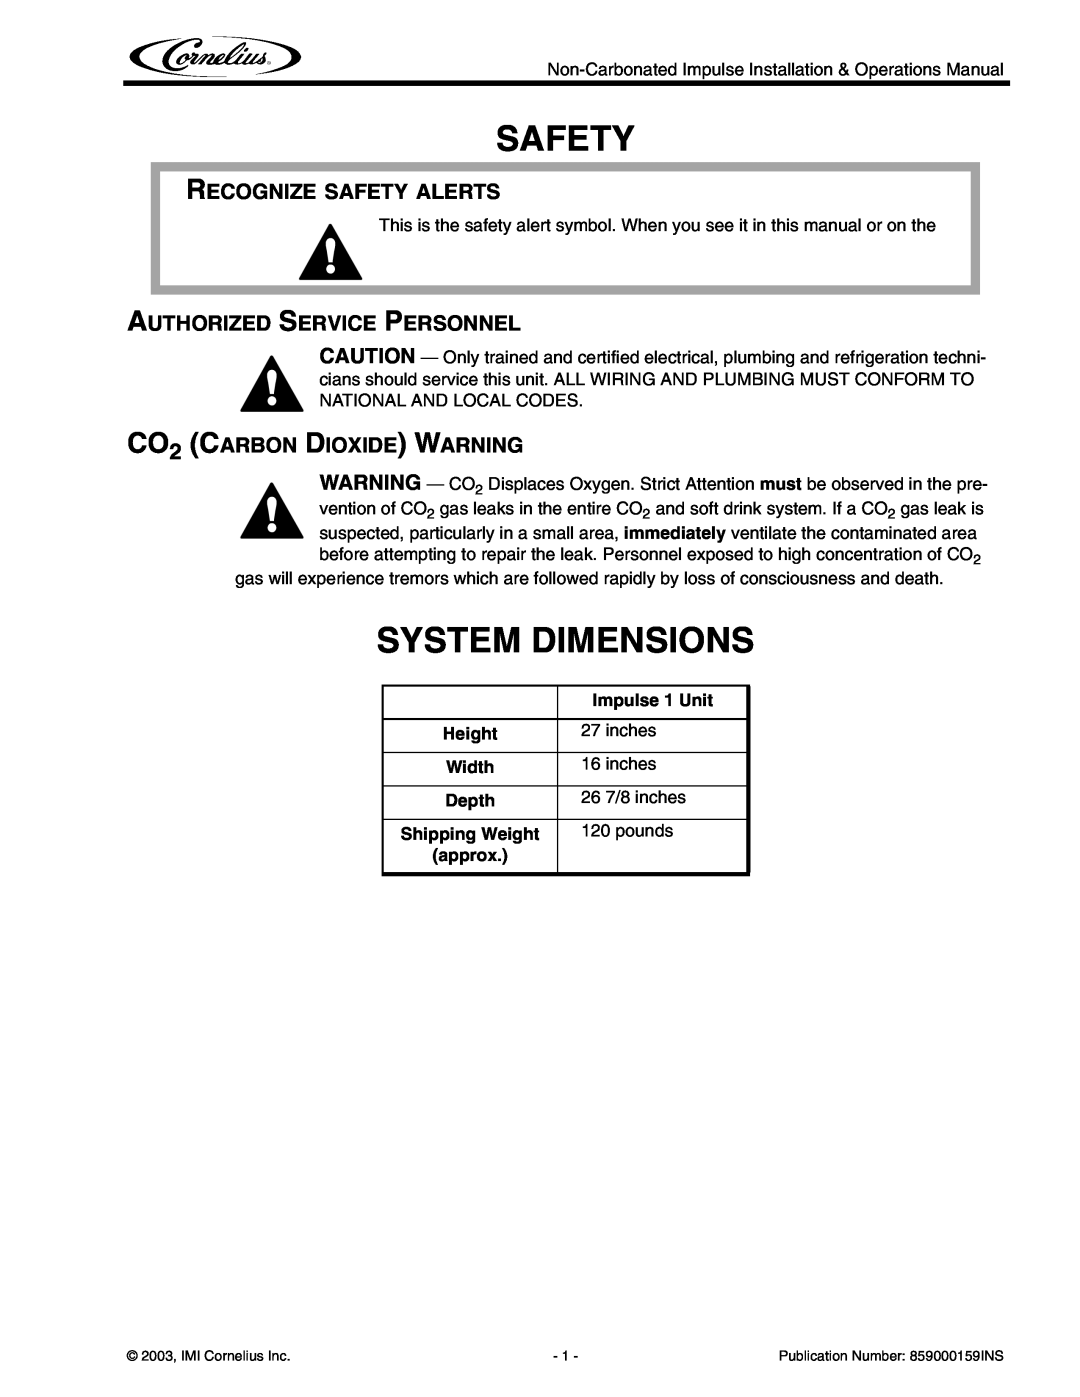 Cornelius Non-Carbonated Post-Mix Beverage Dispenser operation manual System Dimensions, Recognize Safety Alerts 